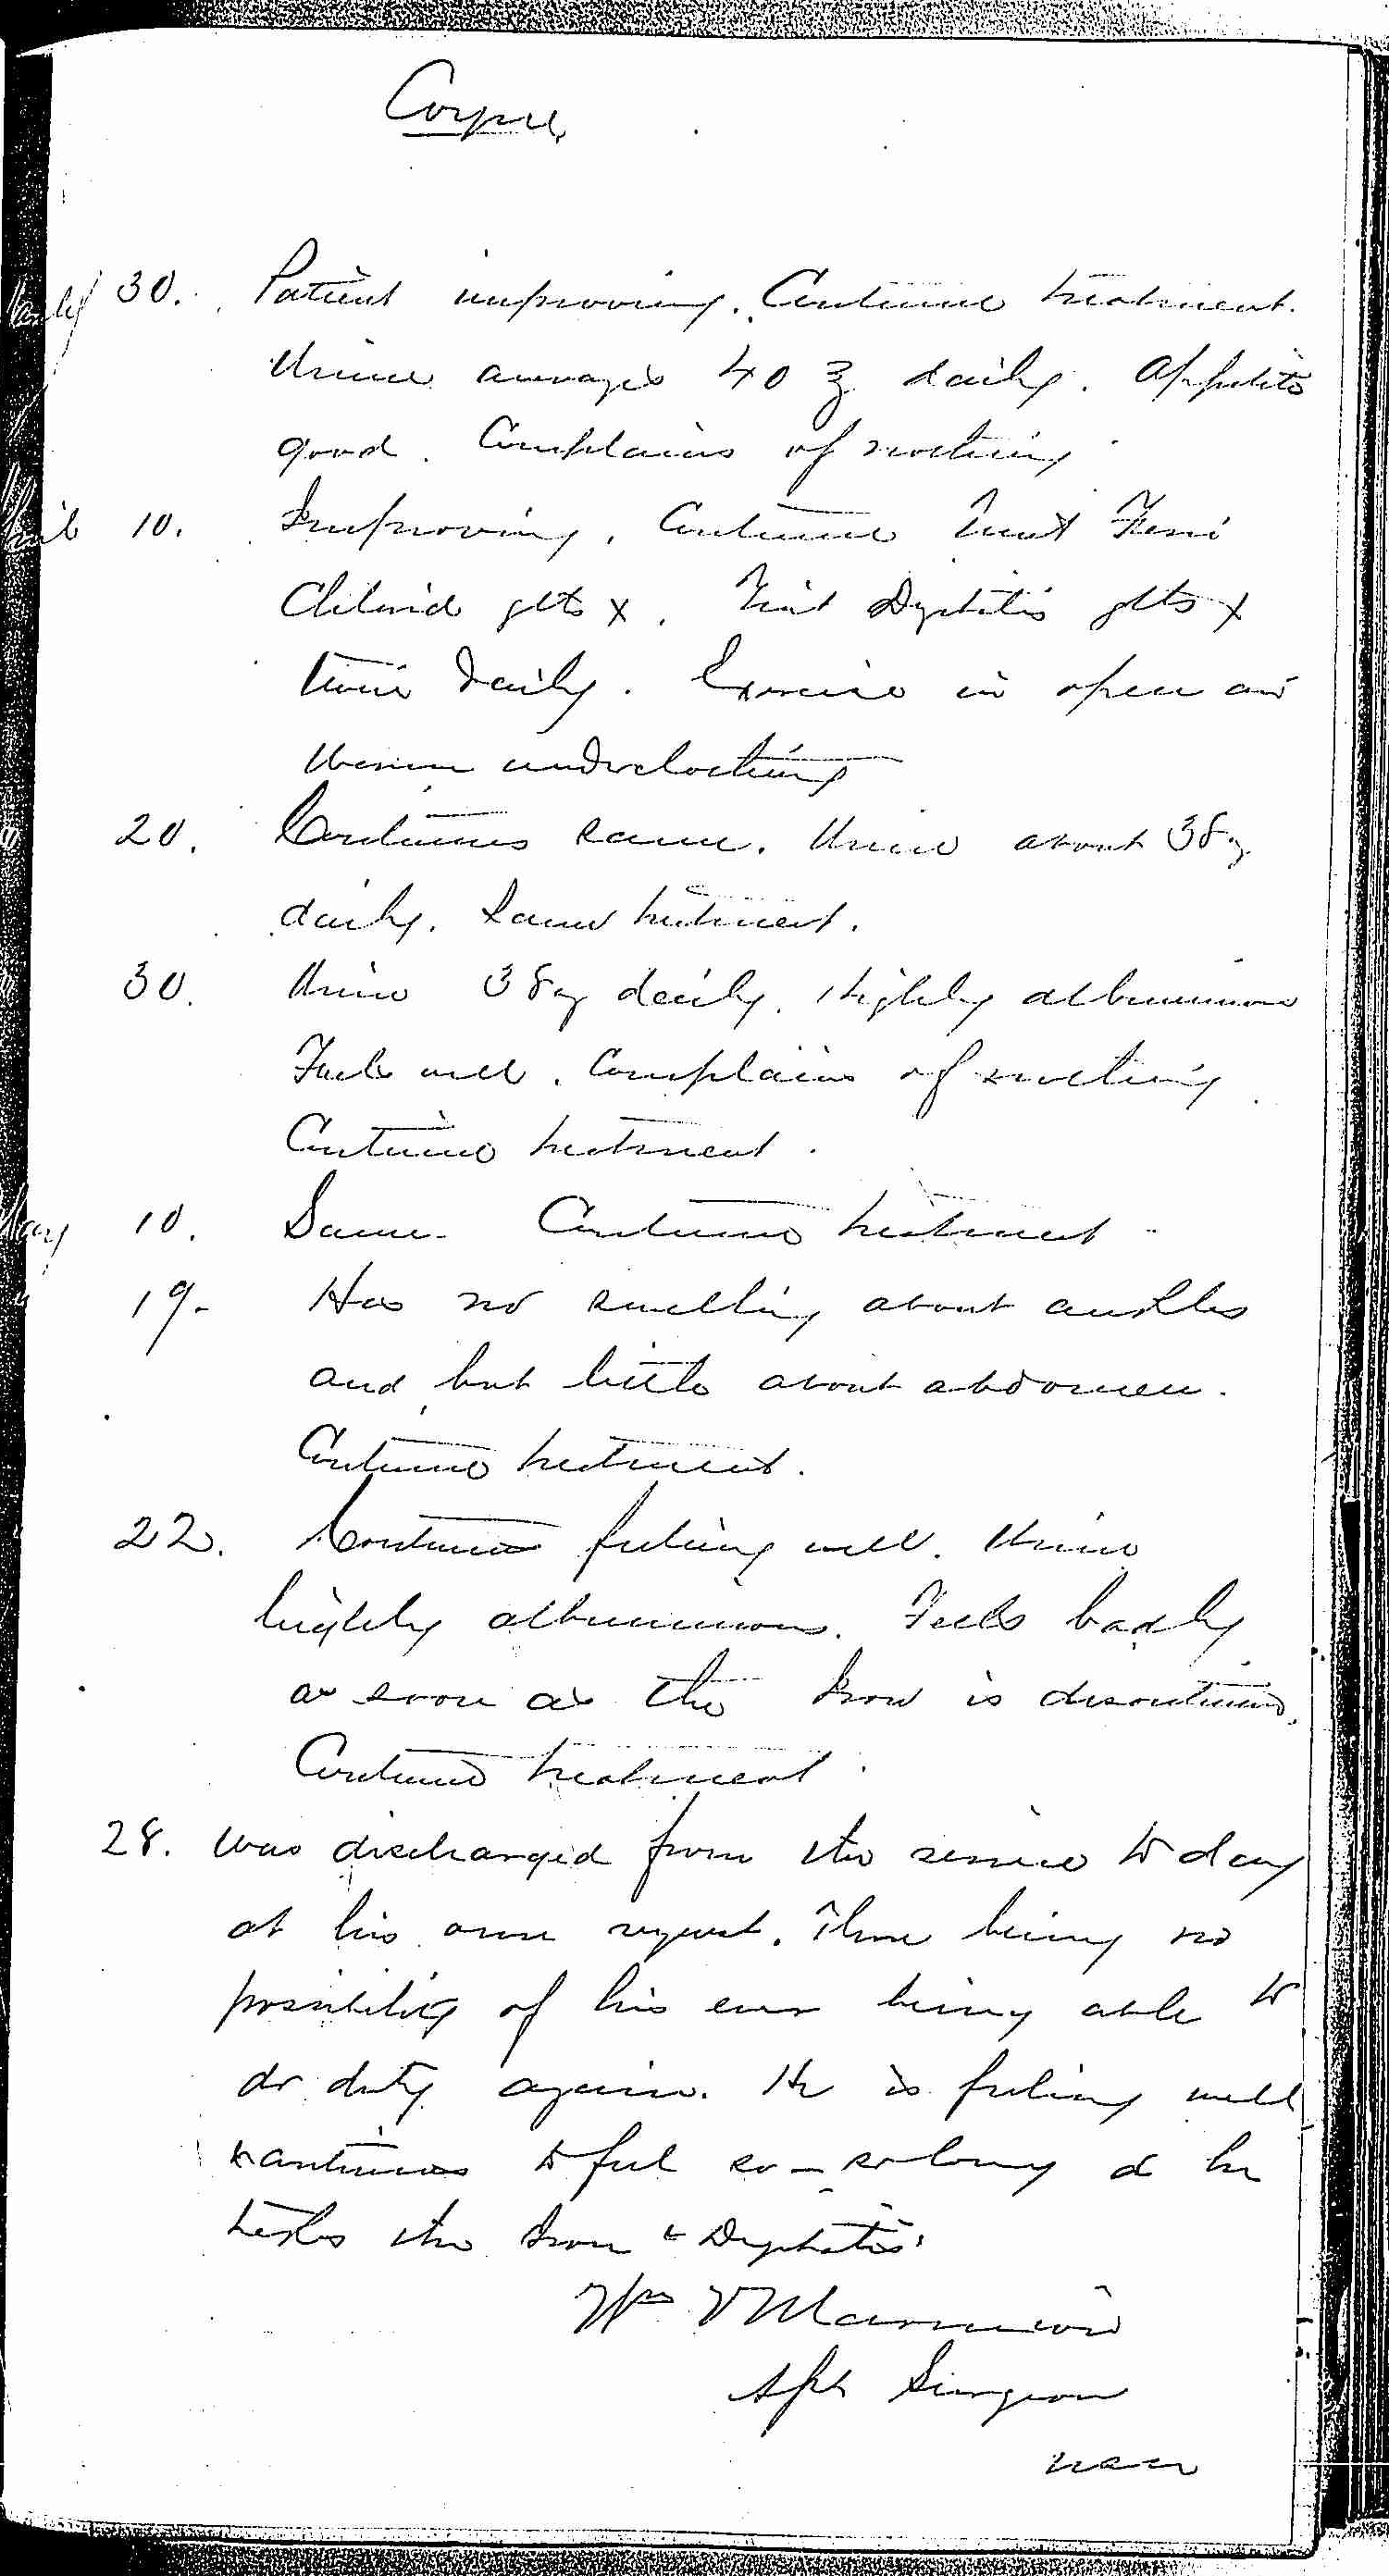 Entry for Bernard Coyne (page 13 of 13) in the log Hospital Tickets and Case Papers - Naval Hospital - Washington, D.C. - 1868-69